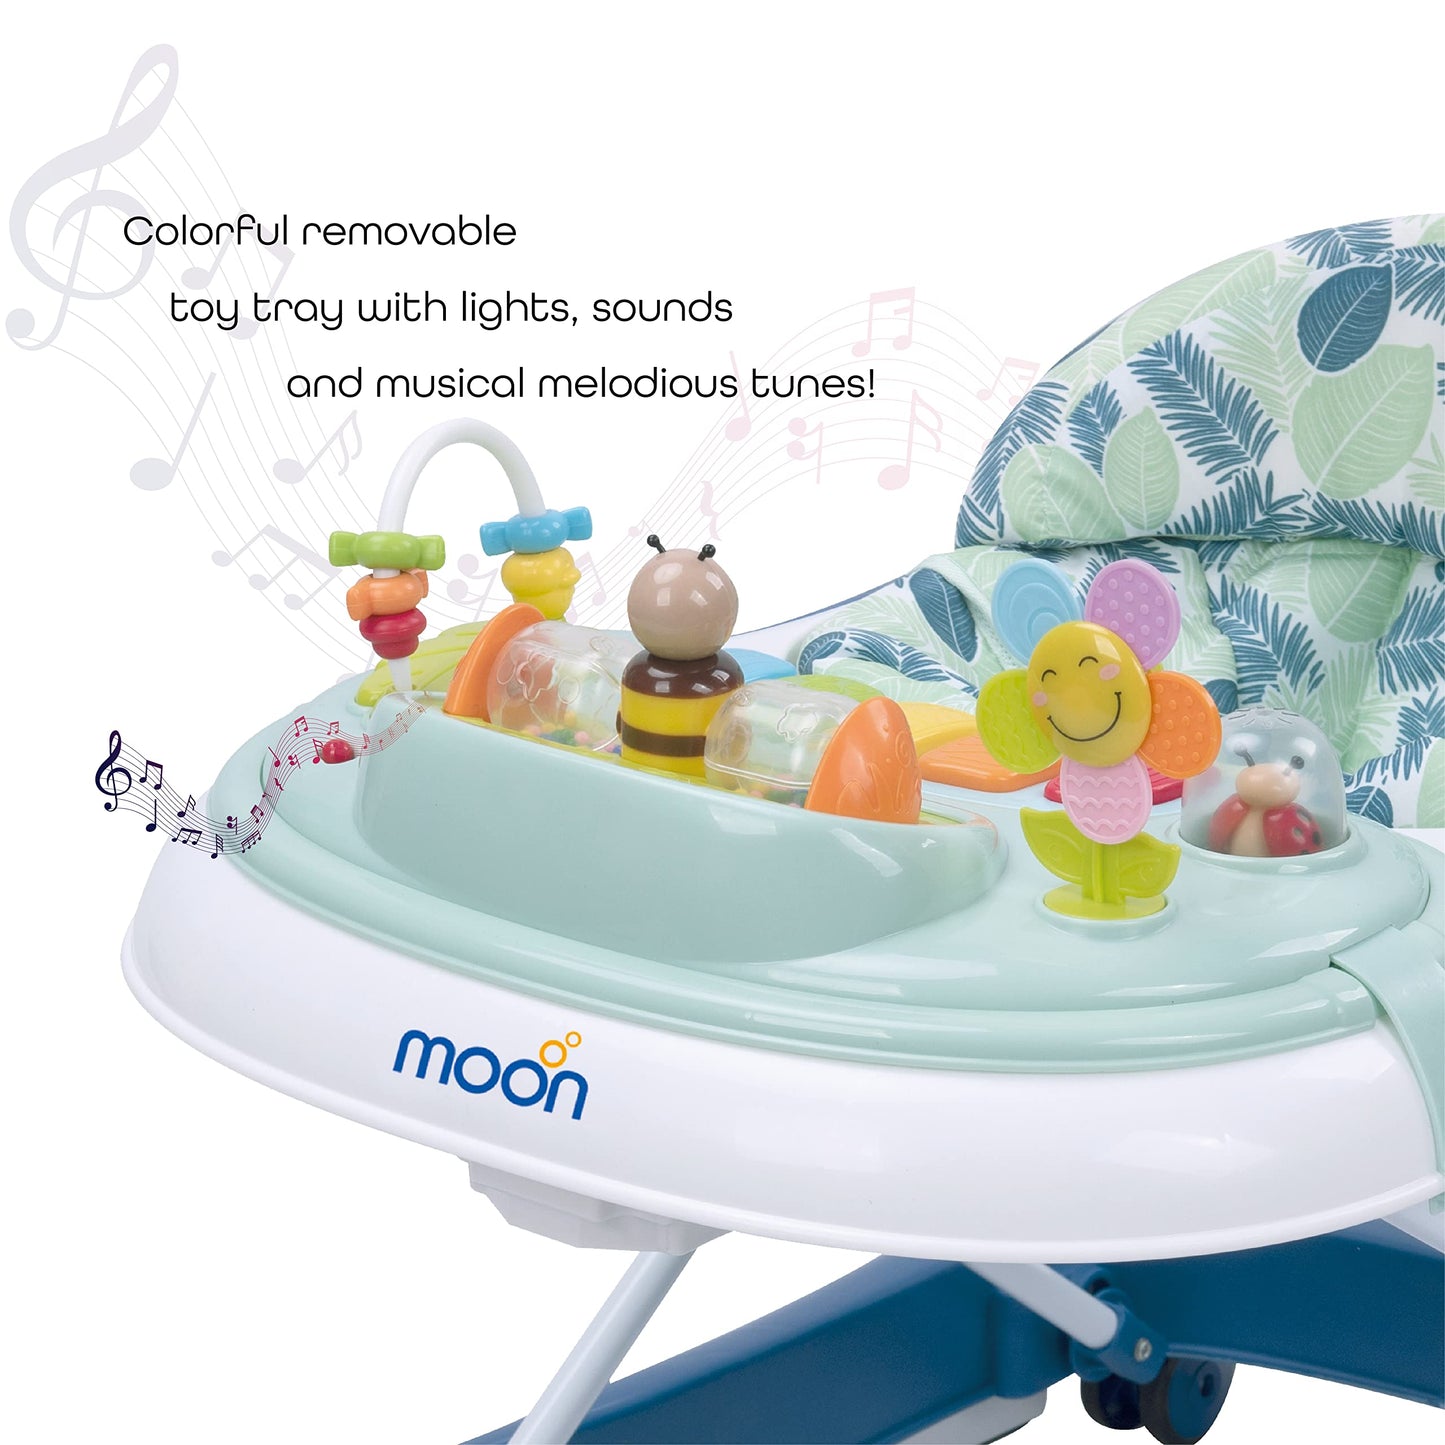 MOON Chase Walker. 6 Months To 18 Months. Removable Music Box. Well Padded Seat. Strong Metal Frame. Plastic Body. Removable Music Tray. Wider Base Design. Height Adjustment. Blue